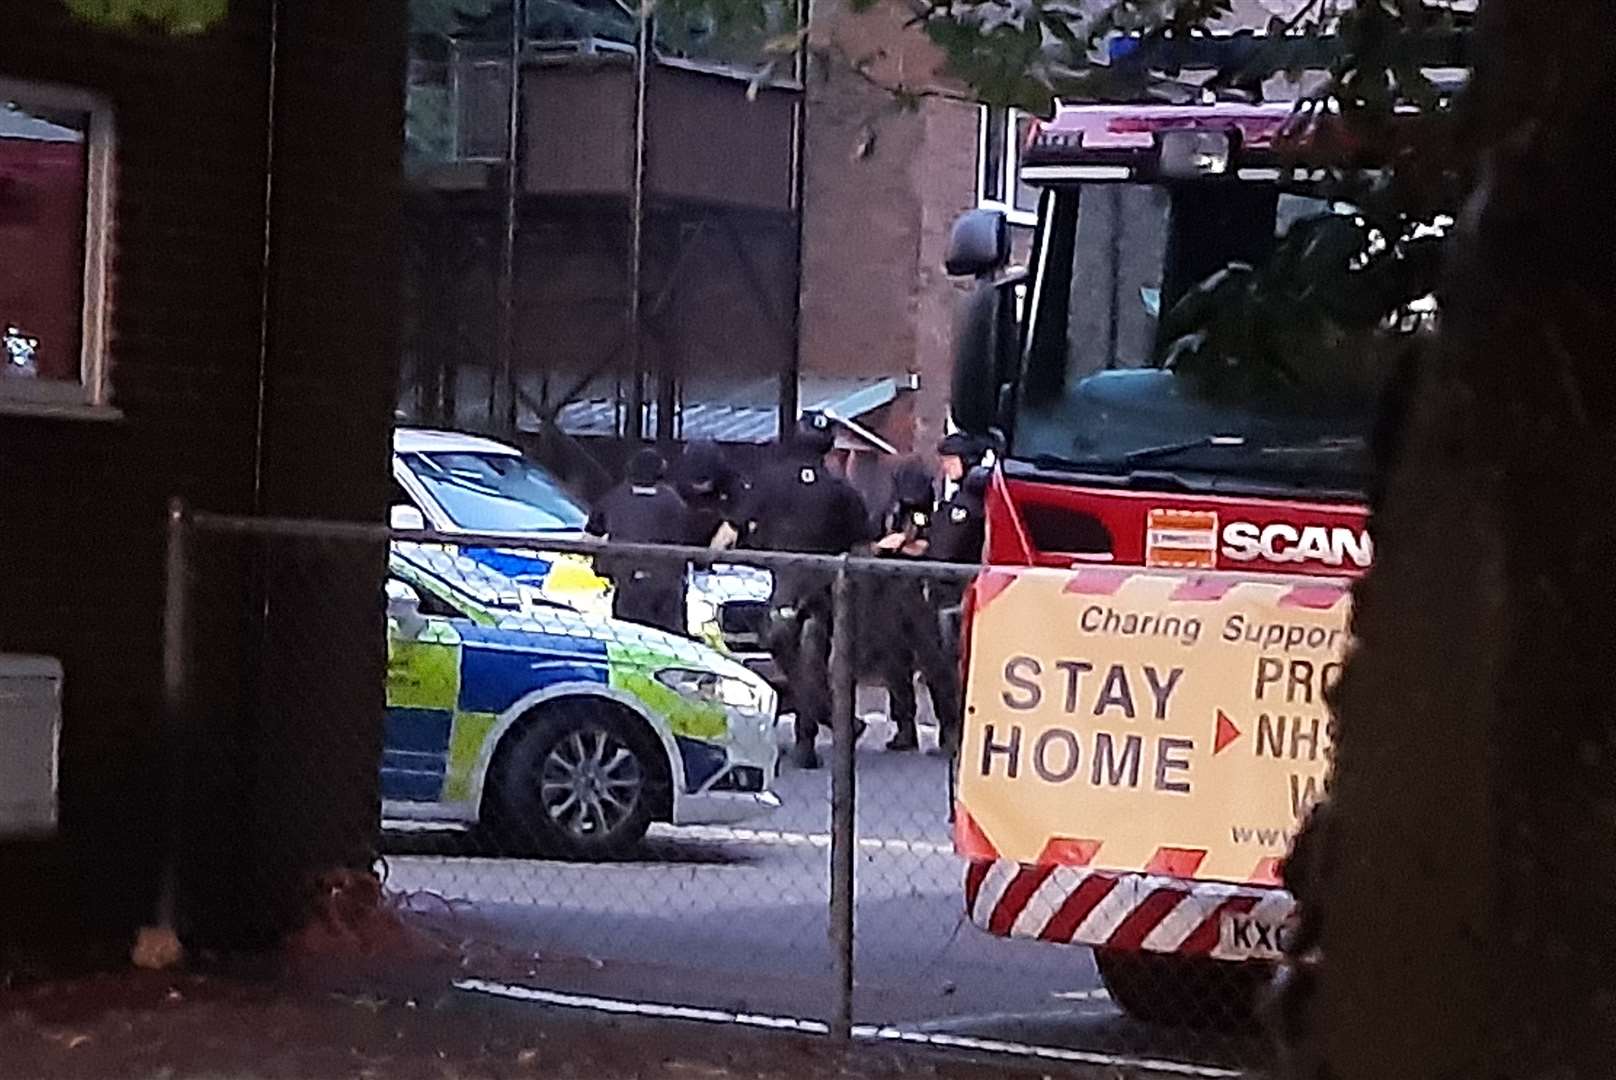 Armed police in Charing this evening